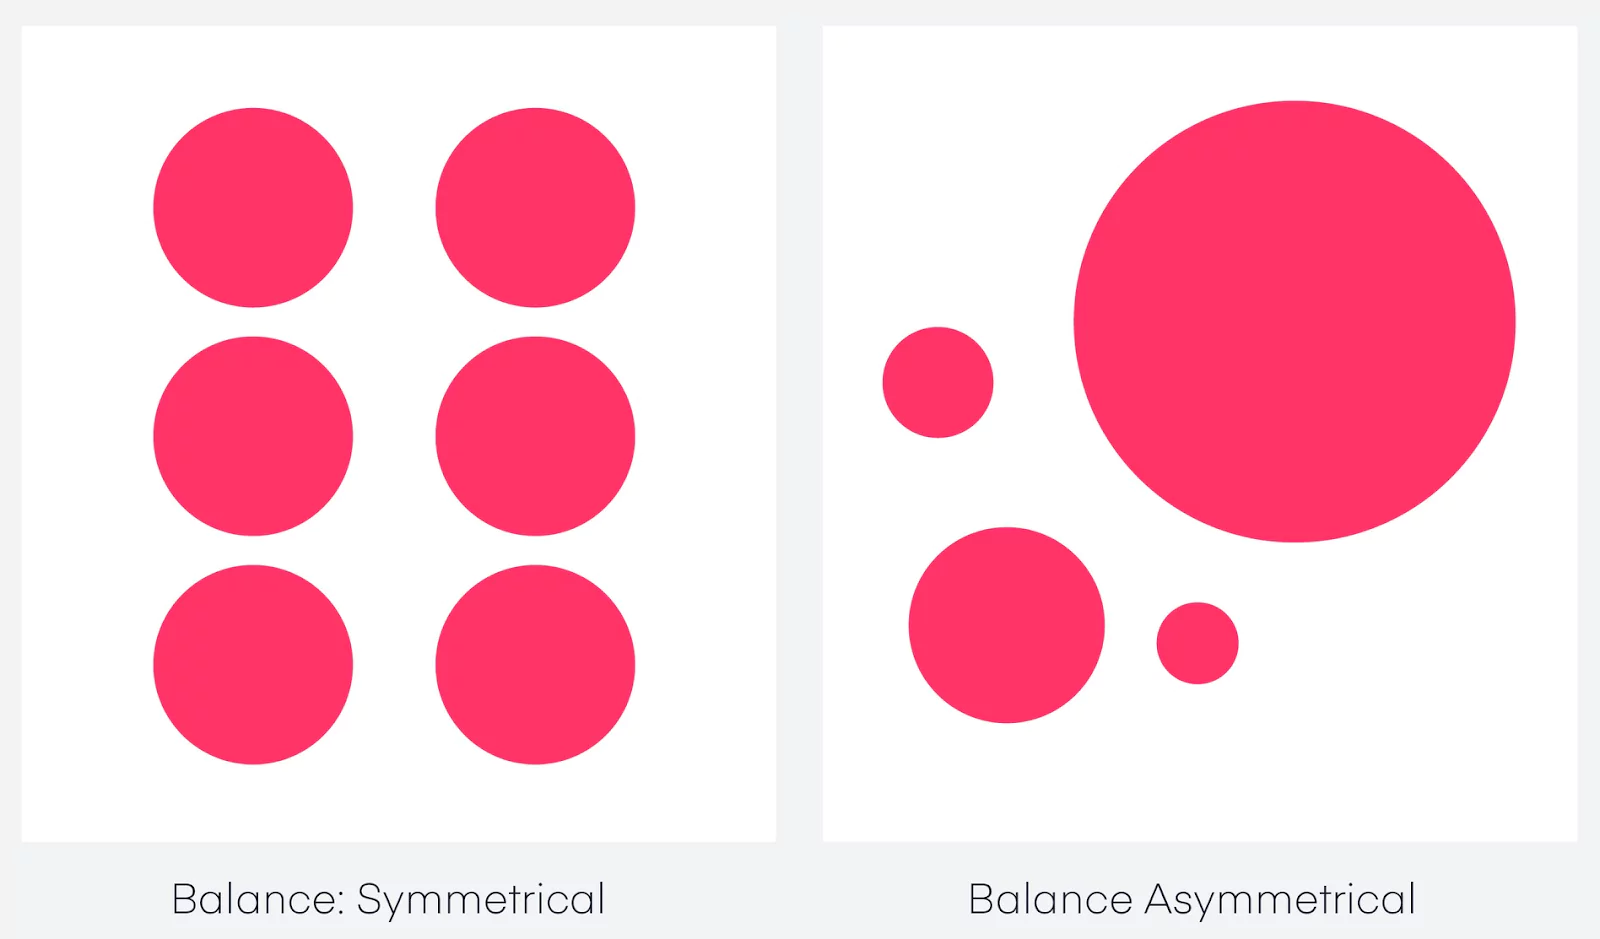 asymmetrical balancing would demand experience from the visual designers